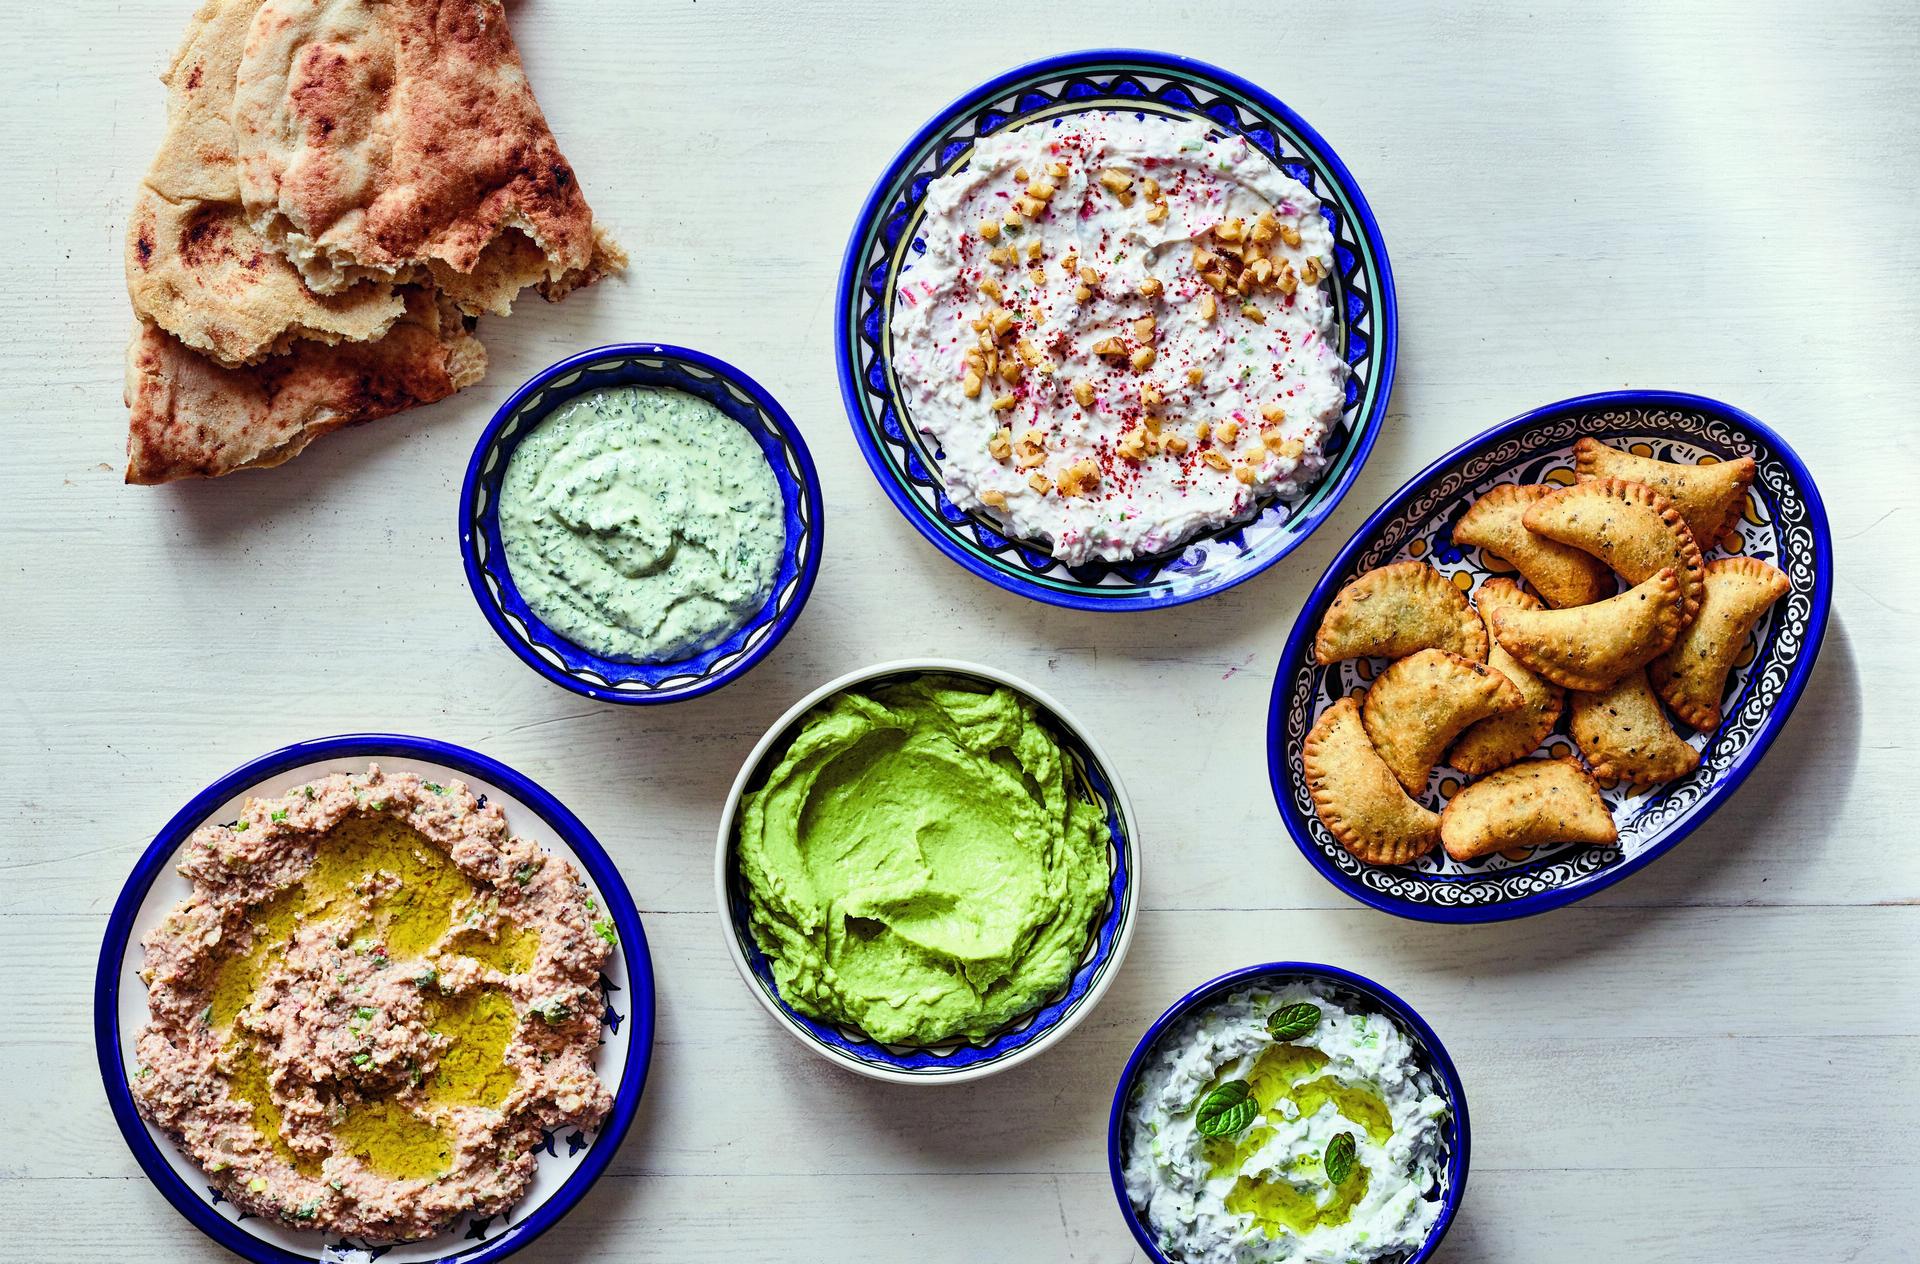 Dips and Small Bites from The Palestinian Table: (clockwise from left) Taboon Bread; Parsley or Cilantro (Coriander) Tahini Spread; Walnut and Garlic Labaneh; Deep-Fried Cheese and Za’atar Parcels; Garlic and Cucumber Labaneh; Avocado, Labaneh, and Preser